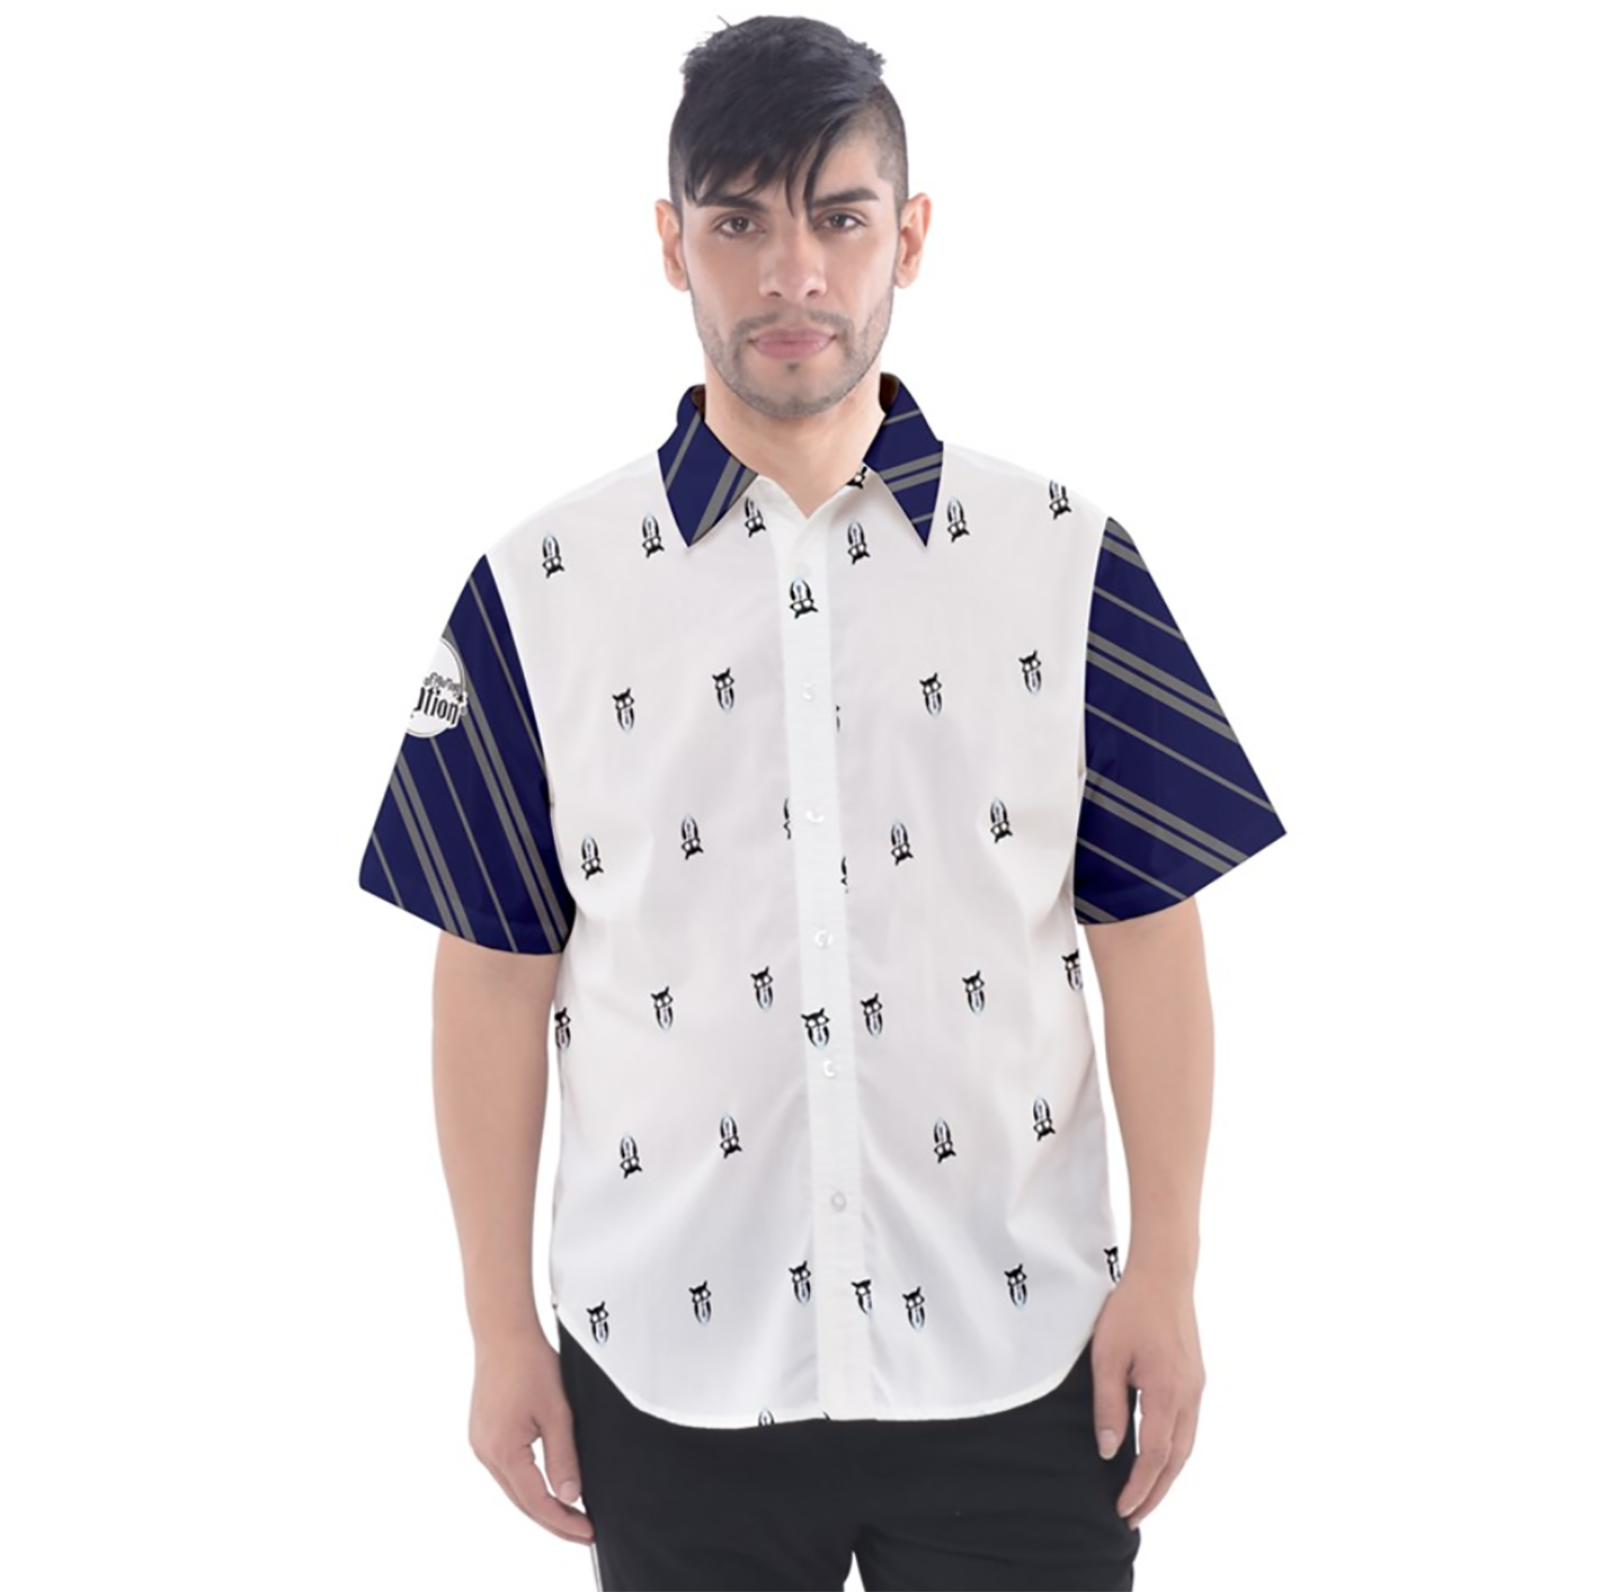 Blue & Gray Owl Patterned Button Up Short Sleeve Shirt - Inspired by Ravenclaw House